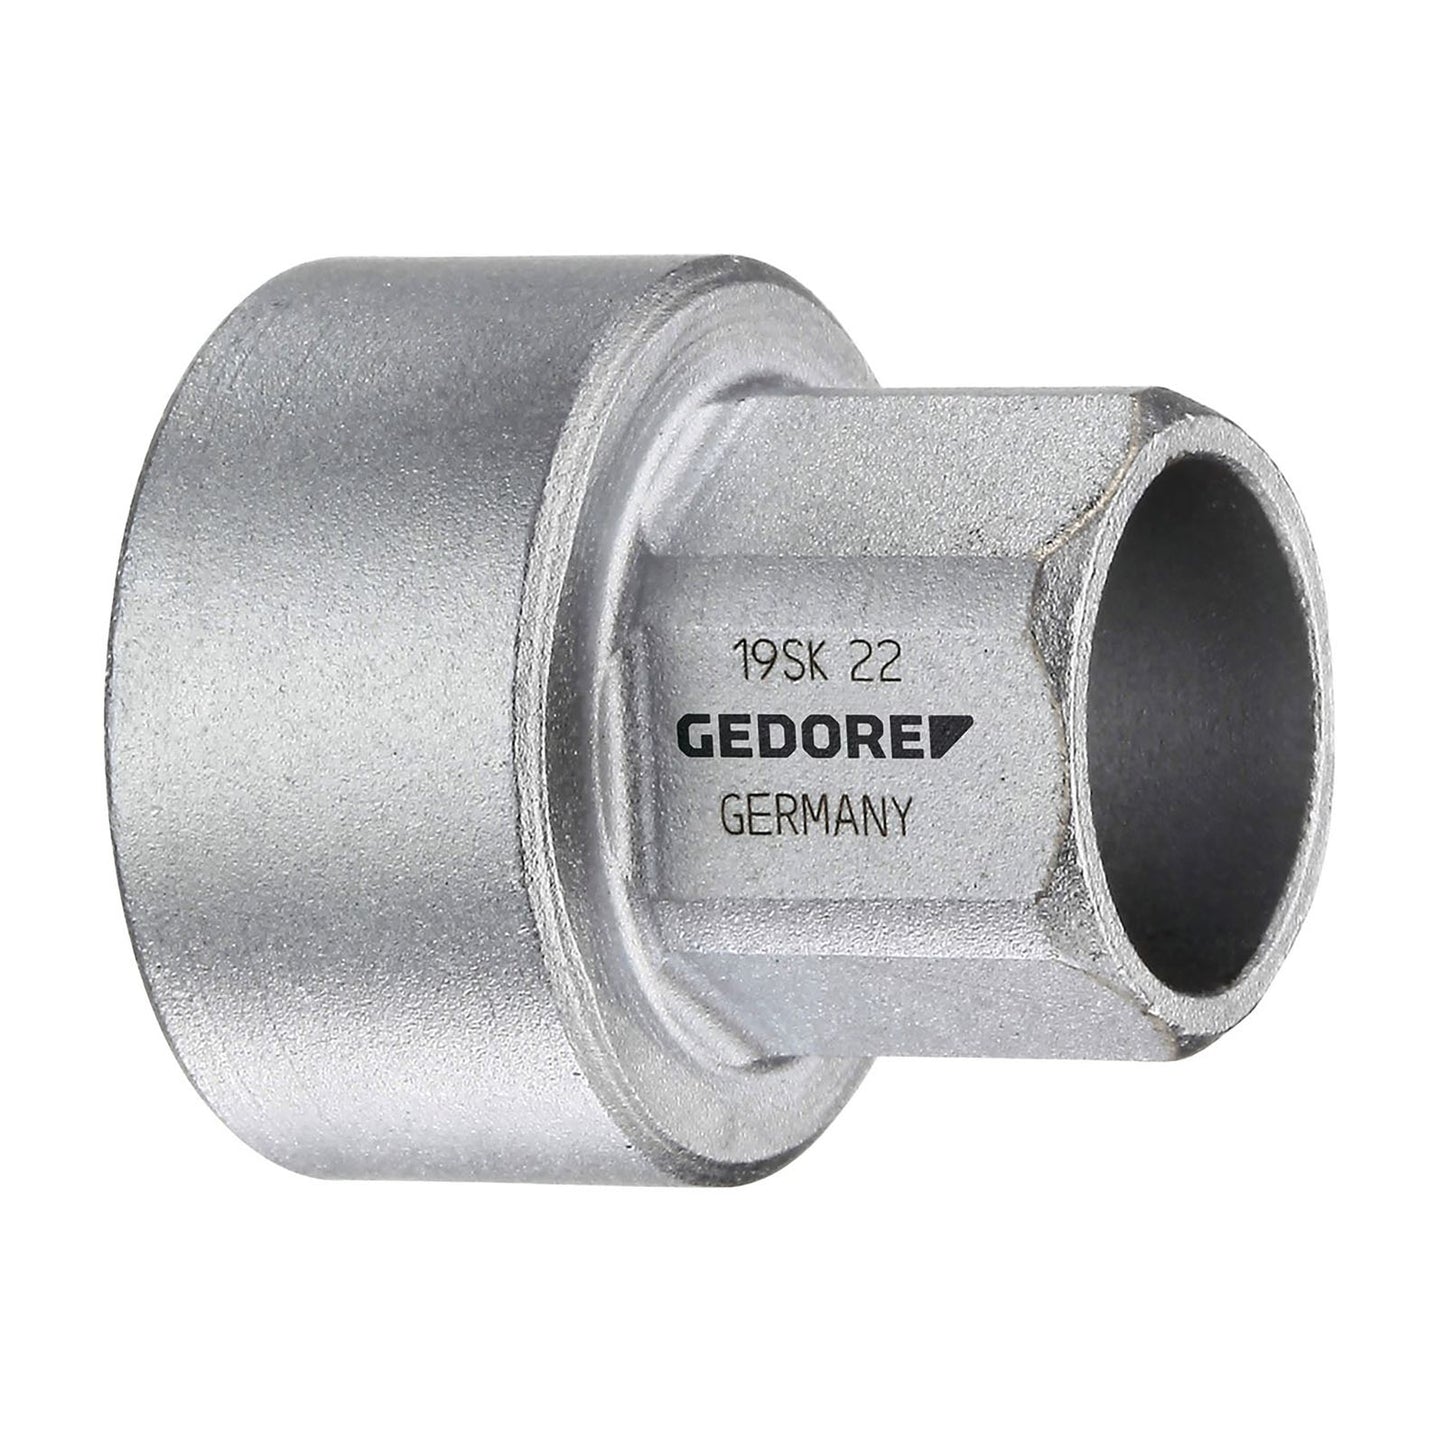 GEDORE 19 SK 12 - special Hex socket 1/2", 12mm (2521555)